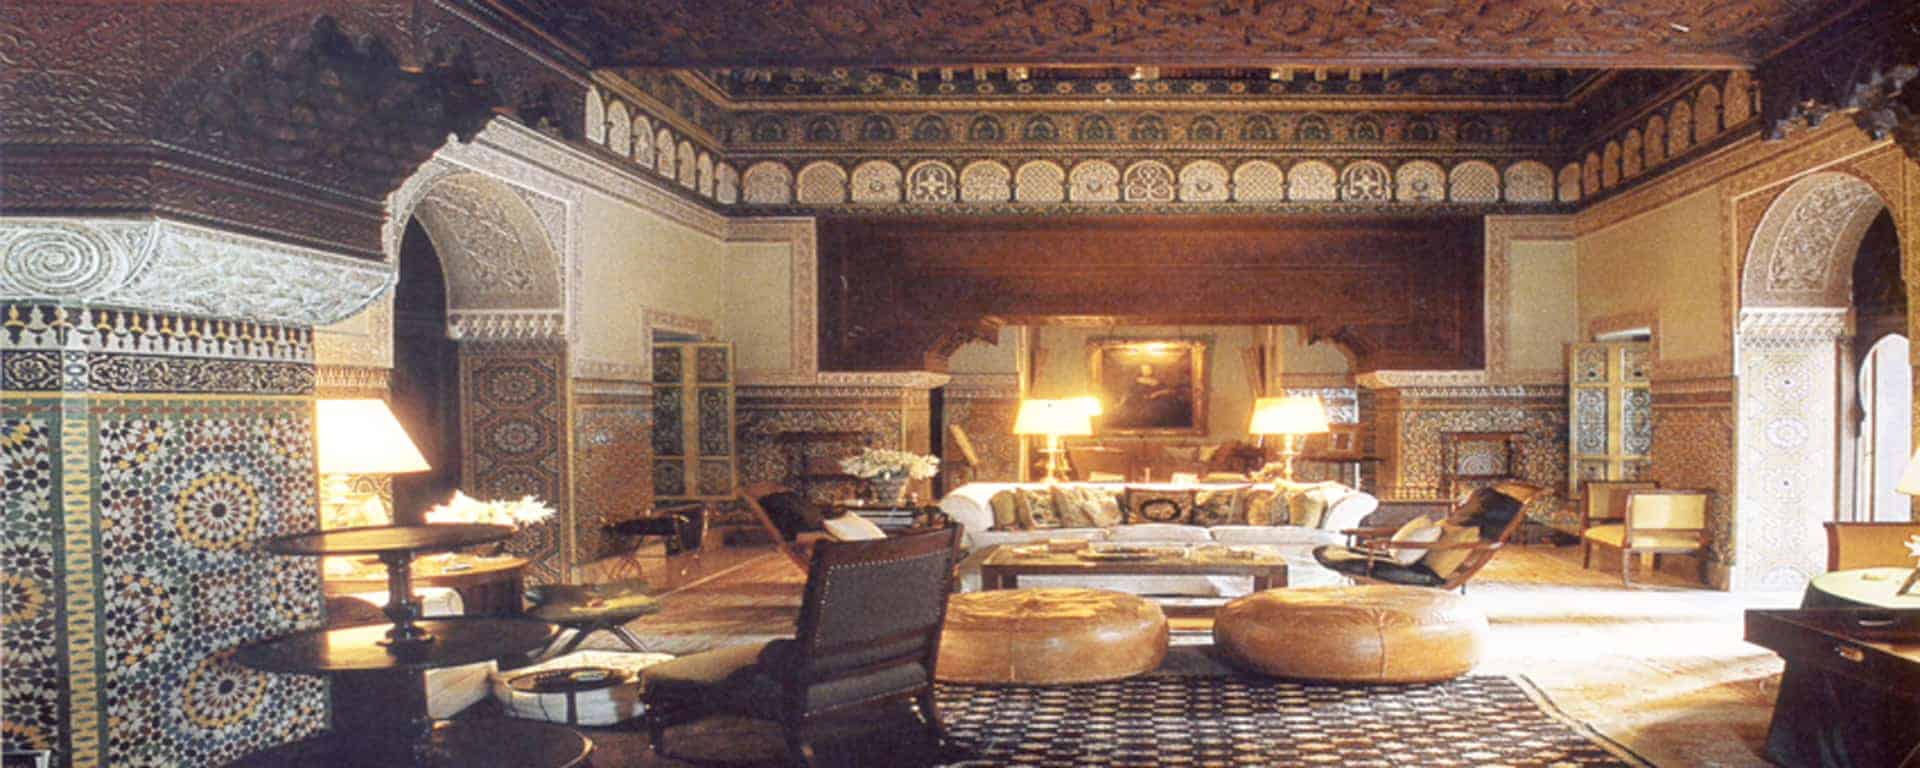 Moroccan Interior Design Style Expert Service & Moroccan Islamic Art Furniture Sale by INDOOR Architecture London UK